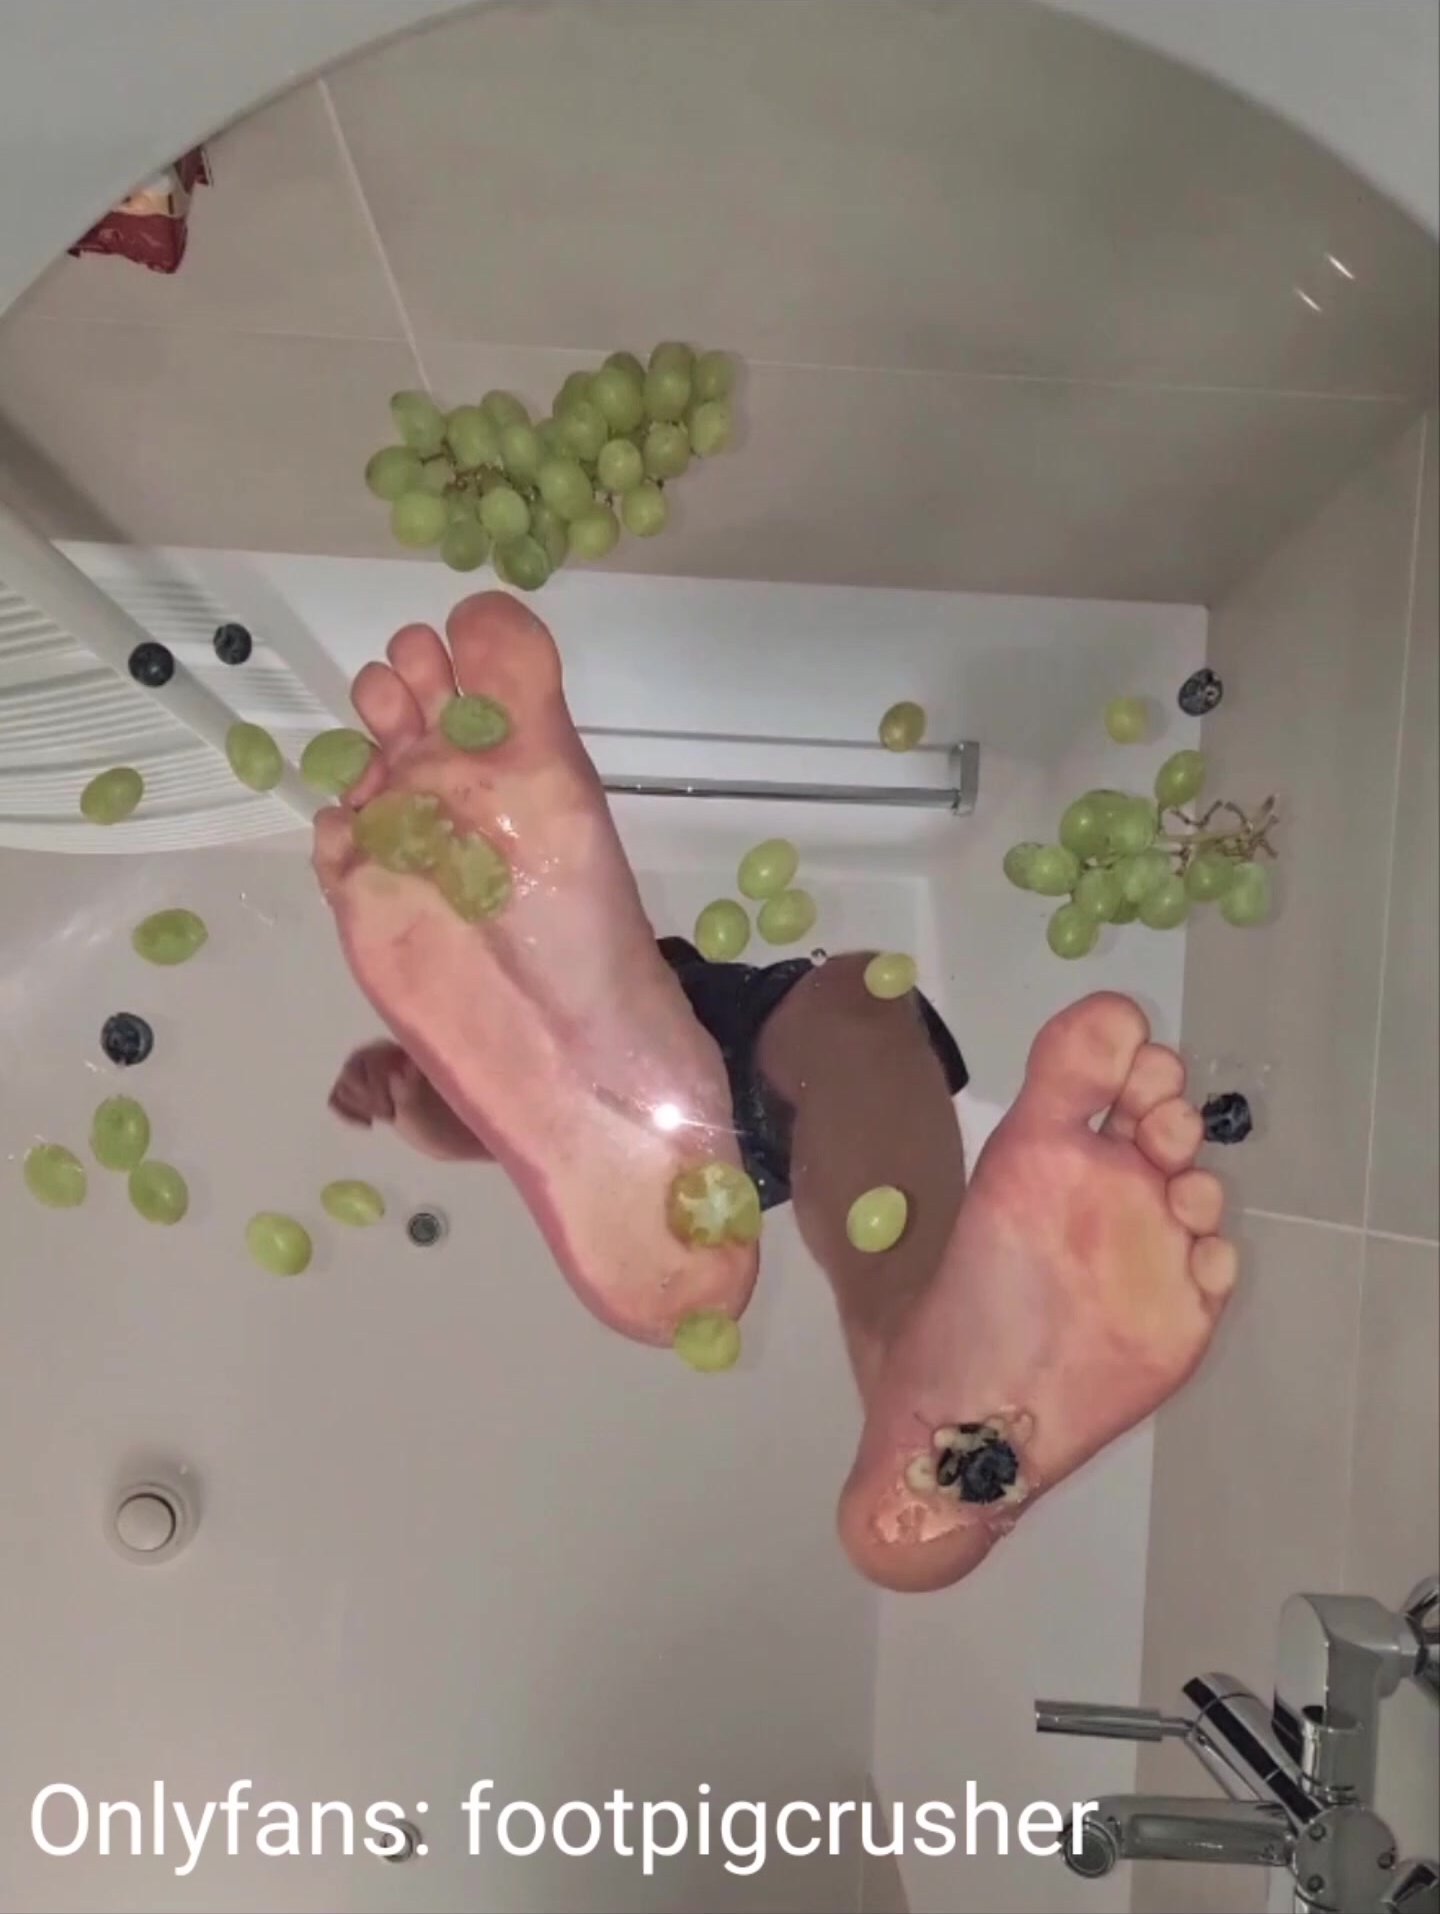 Underglass crushing grapes under my naked foot soles